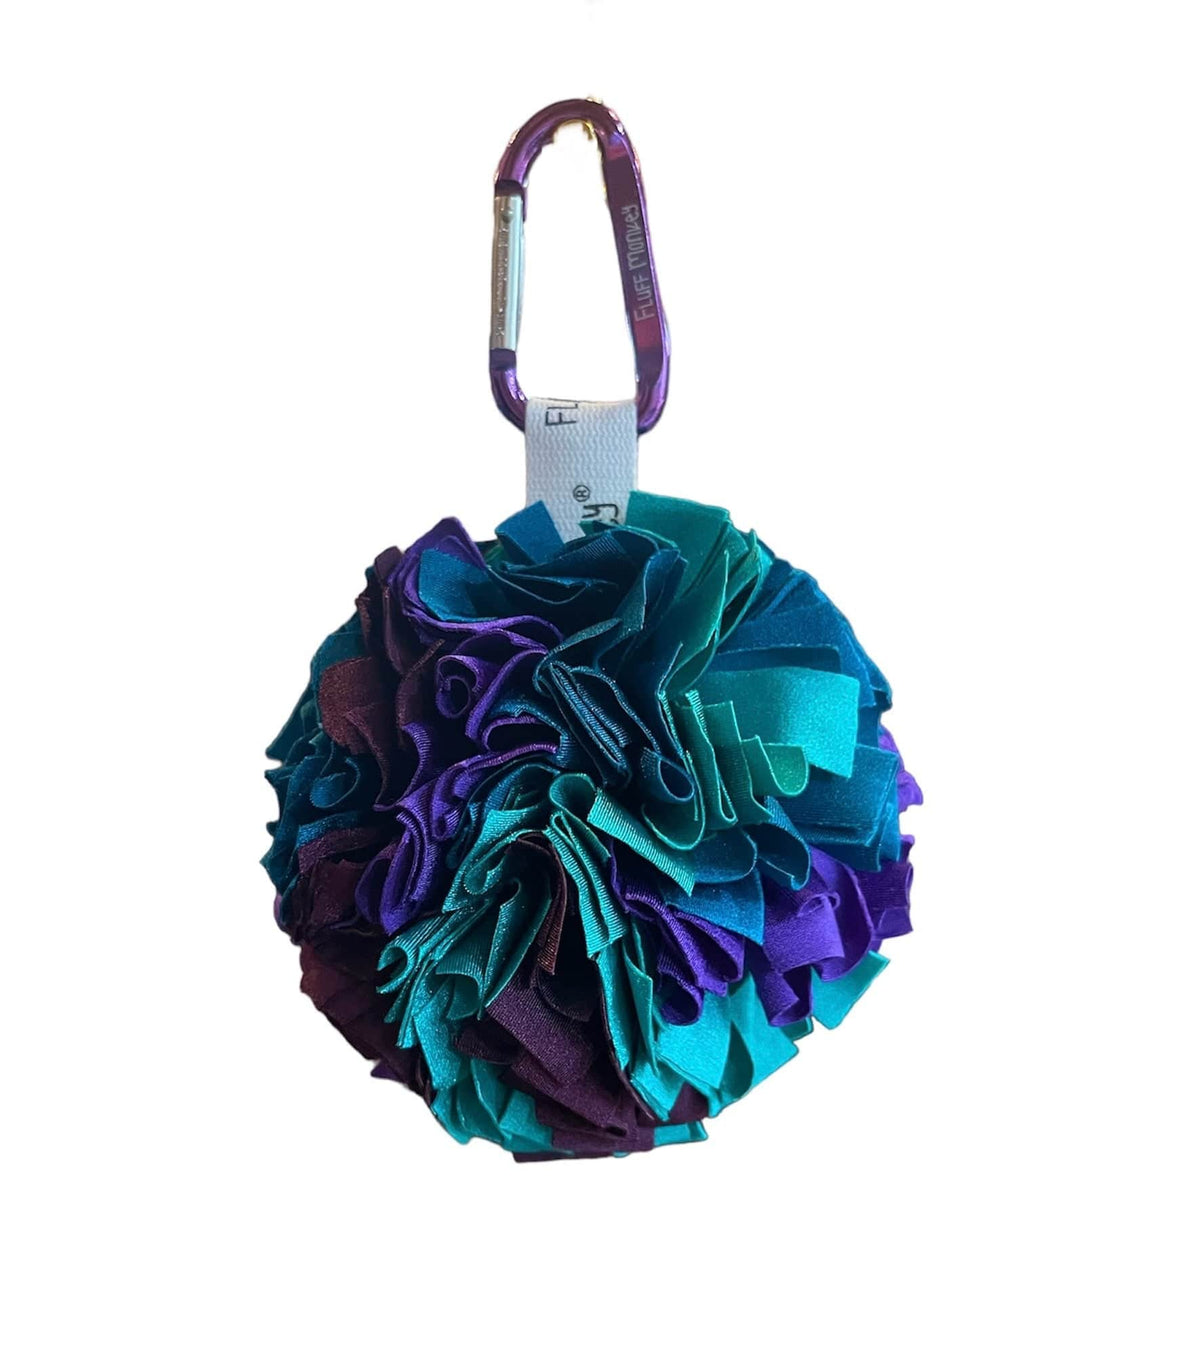 Fluff Monkey Accessory Purple/Teal/Burgundy Fluff Monkey- Large equestrian team apparel online tack store mobile tack store custom farm apparel custom show stable clothing equestrian lifestyle horse show clothing riding clothes horses equestrian tack store